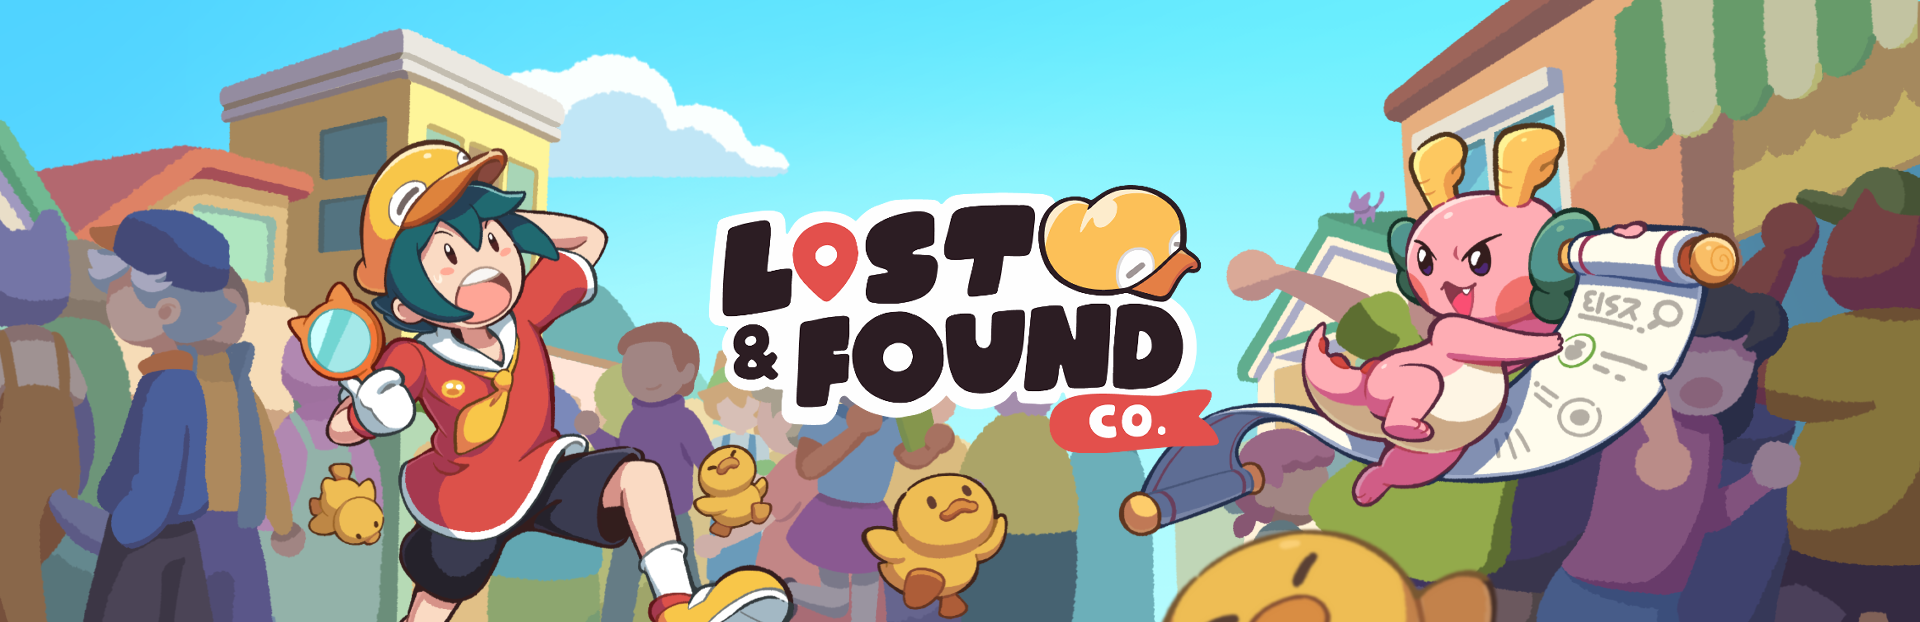 Lost and Found Co. Demo